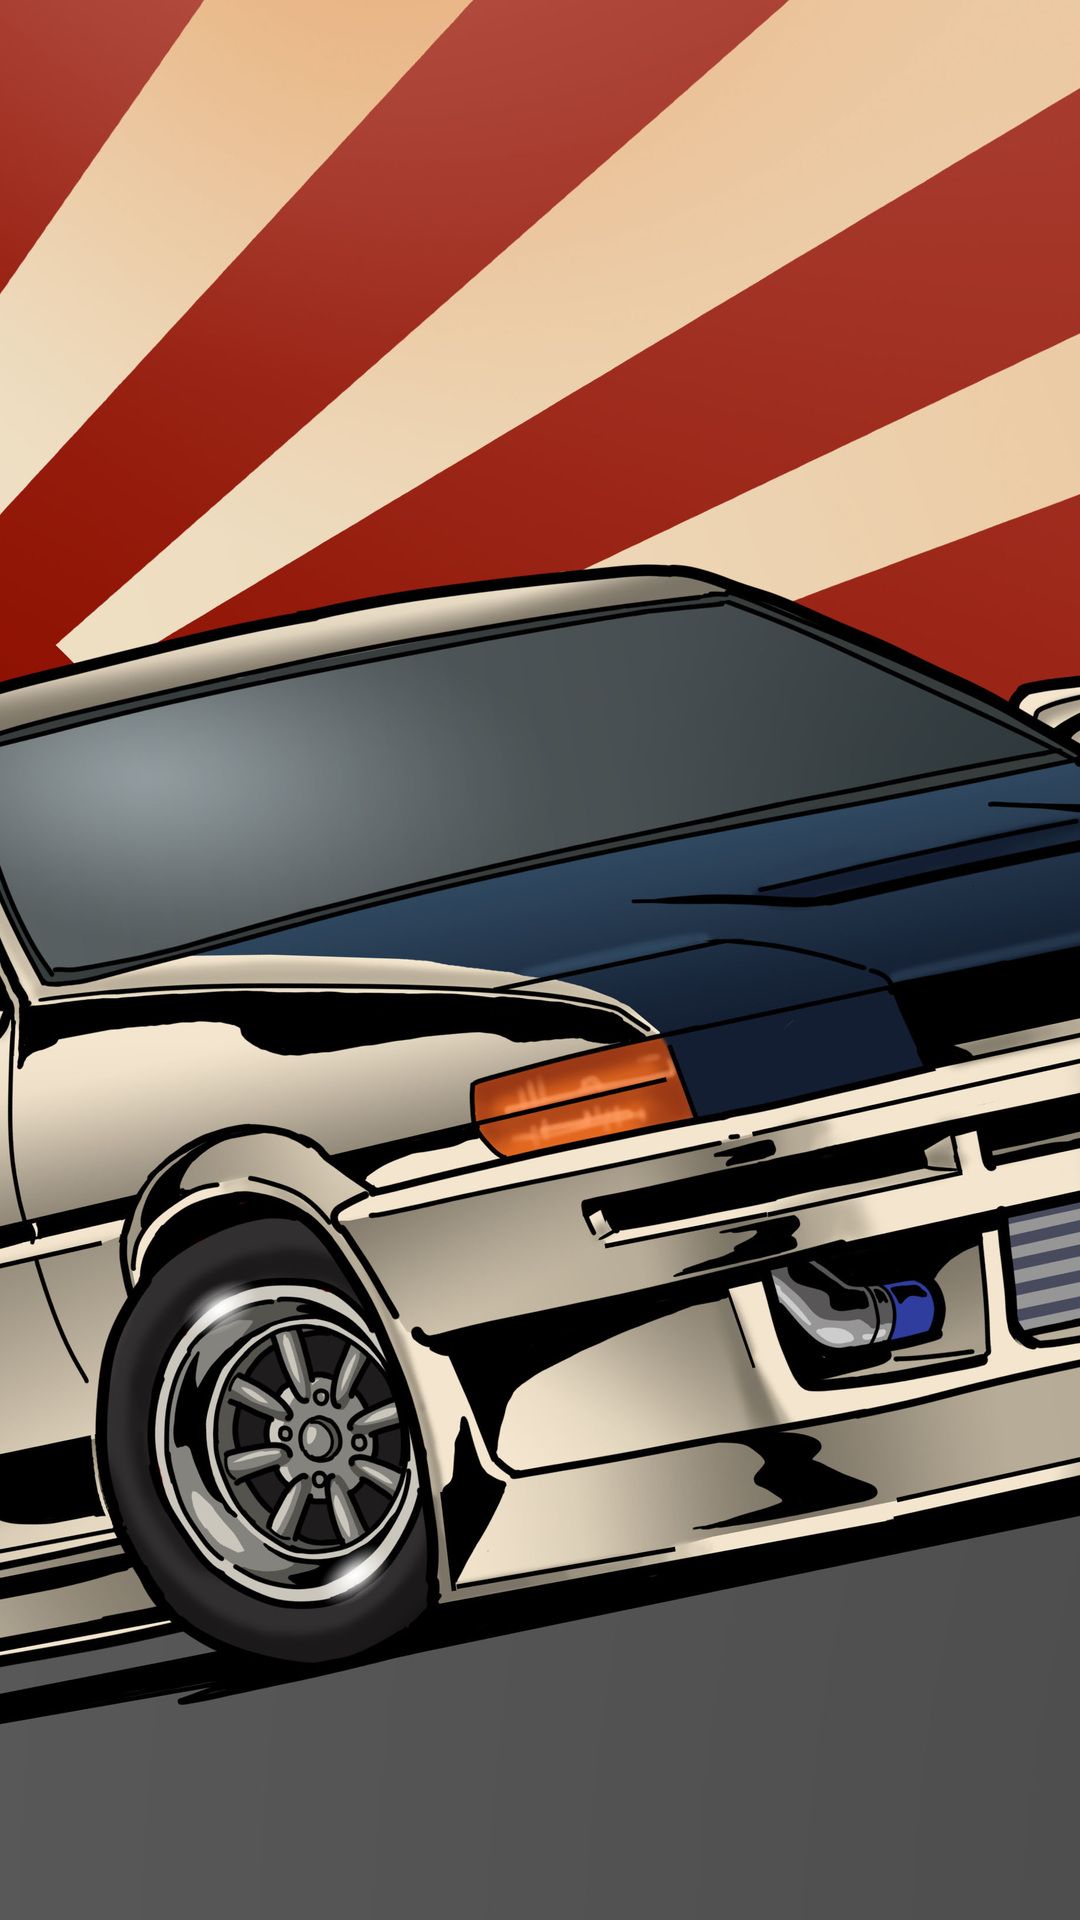 Ae86 Android Wallpapers - Wallpaper Cave